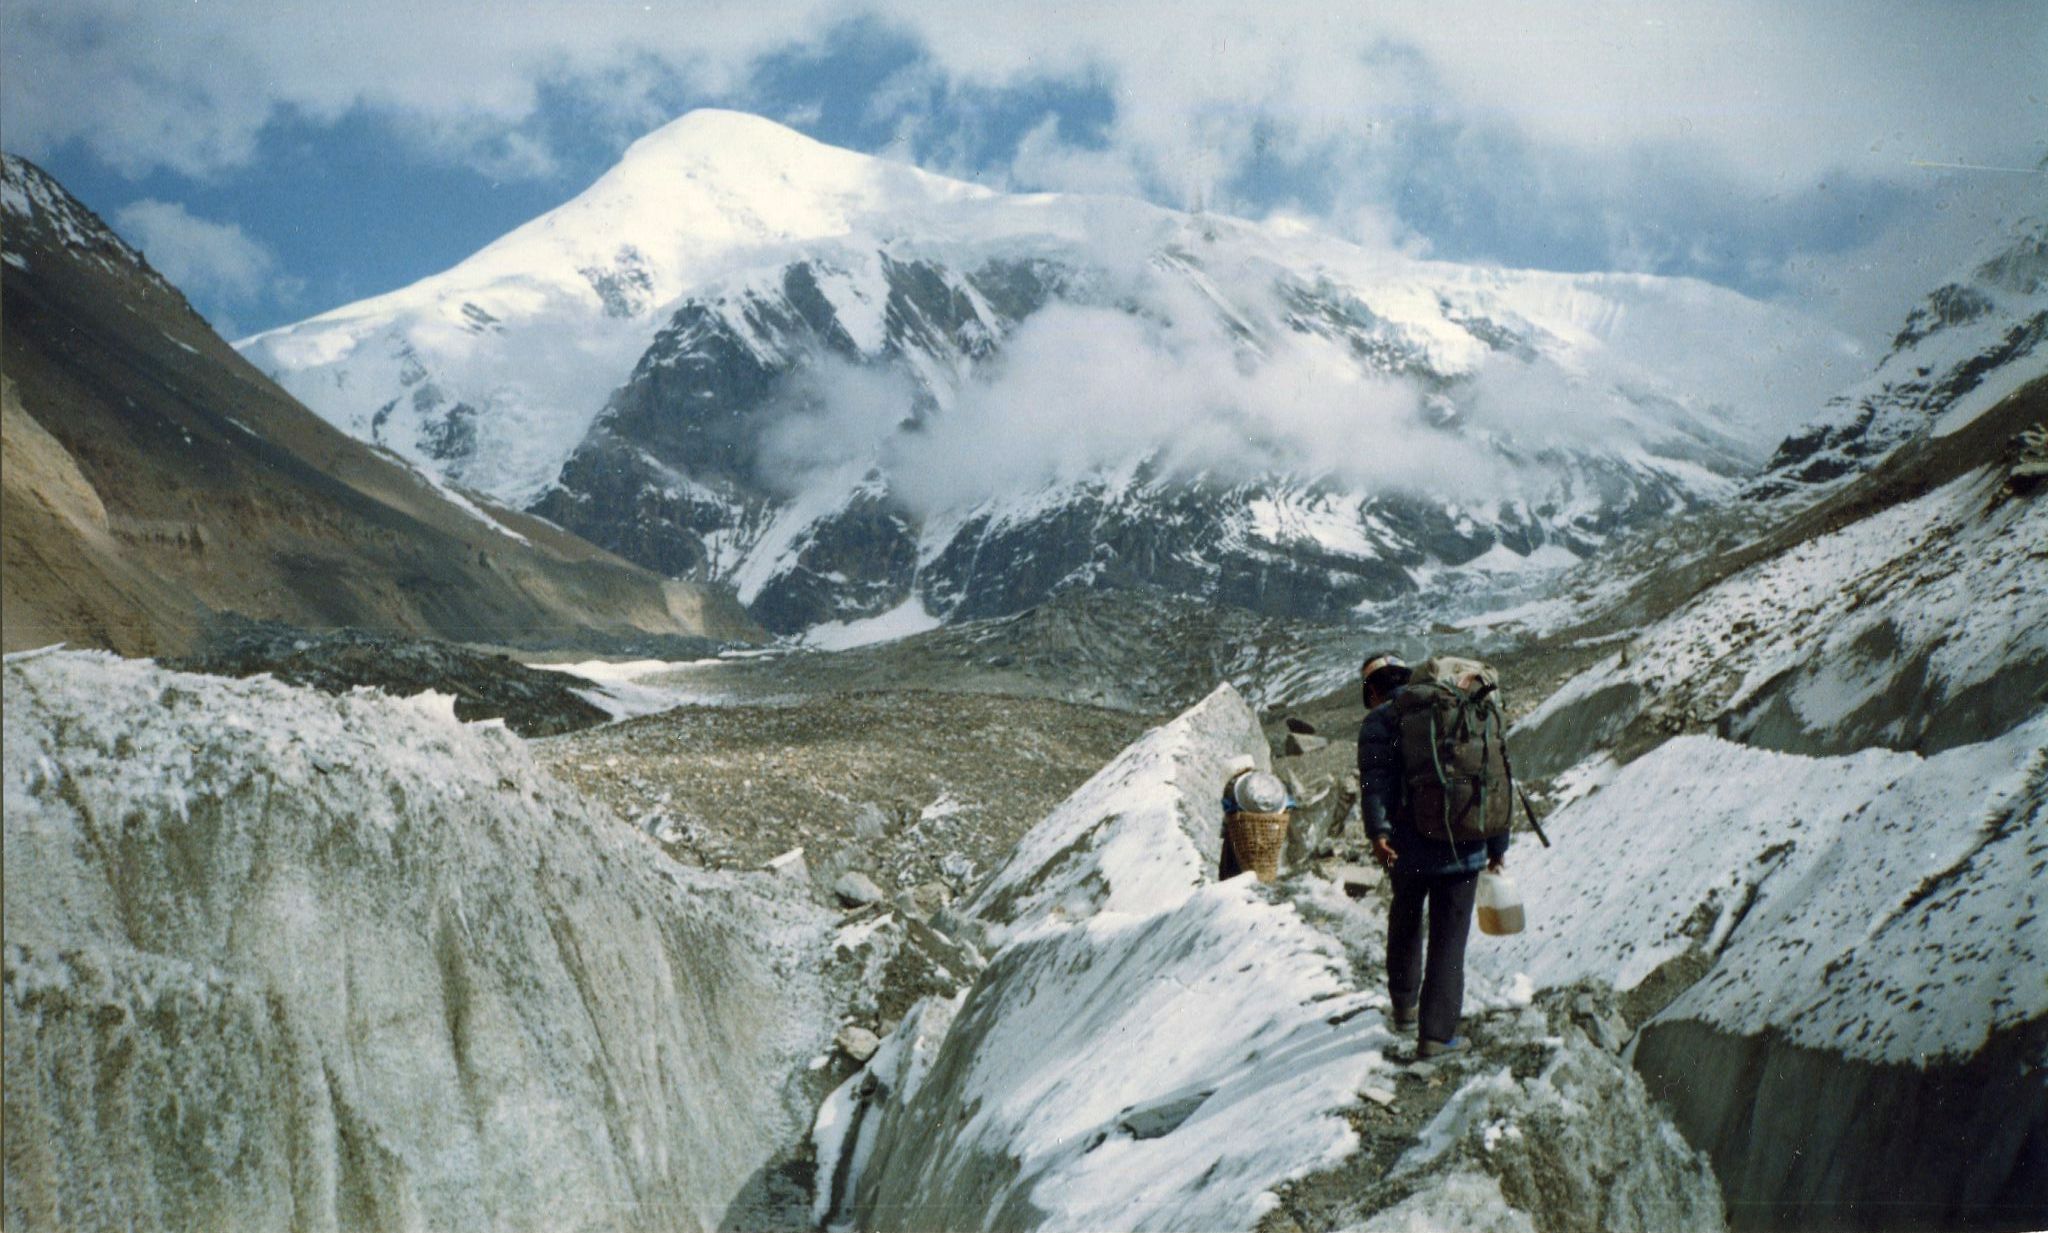 Tukuche Peak ( 6920m ) from Chonbarden Glacier on approach to Dhaulagiri Base Camp